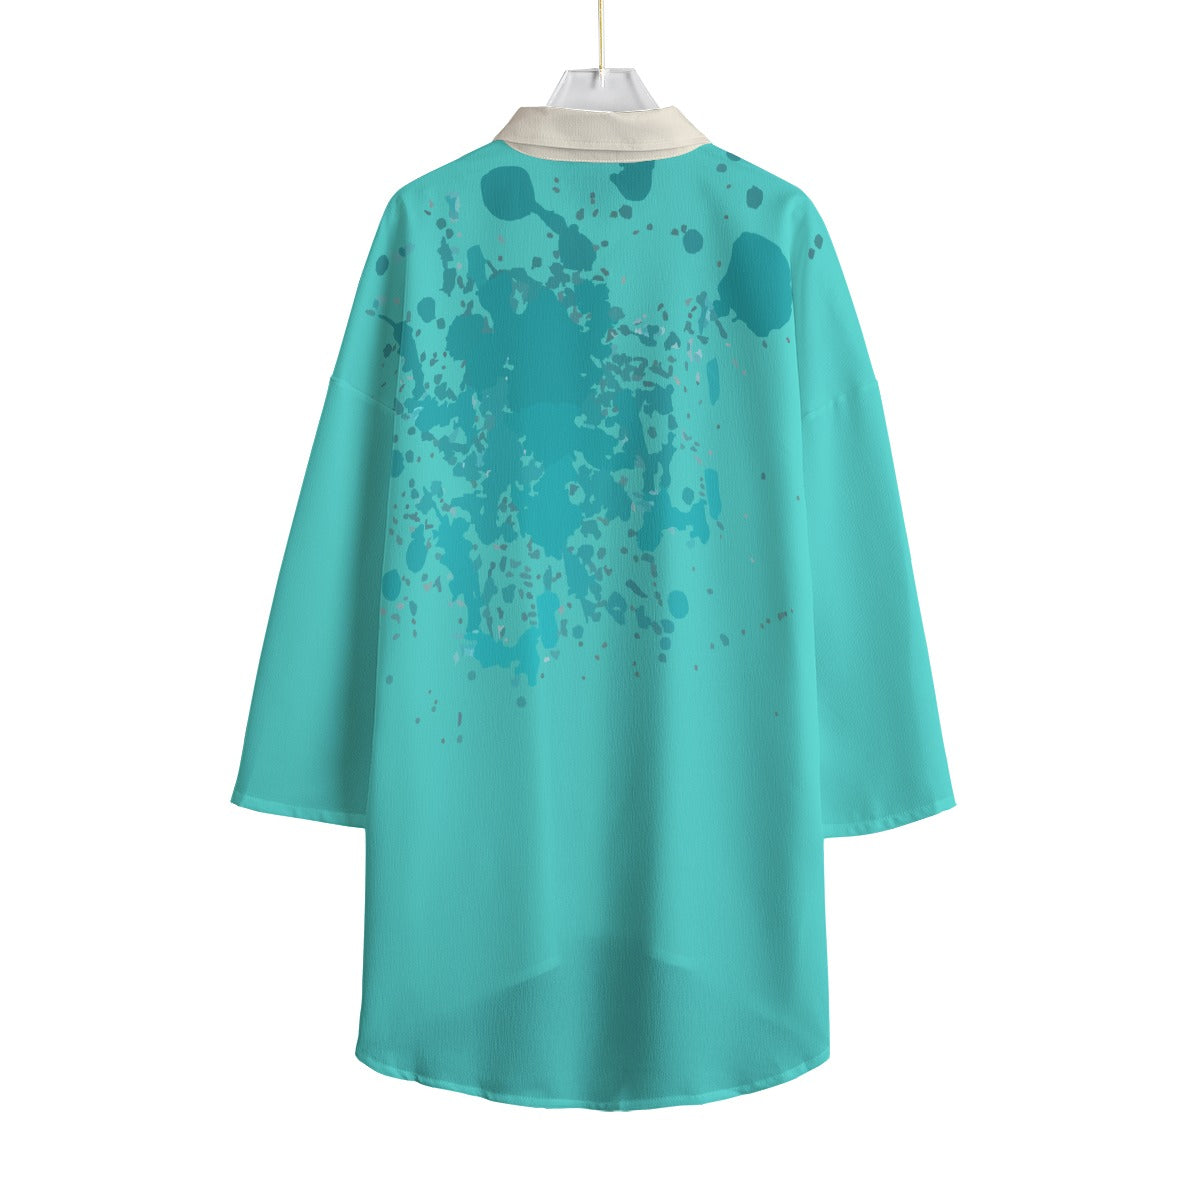 All-Over Print Women's Chiffon Shirt With Elbow Sleeve Yoycol